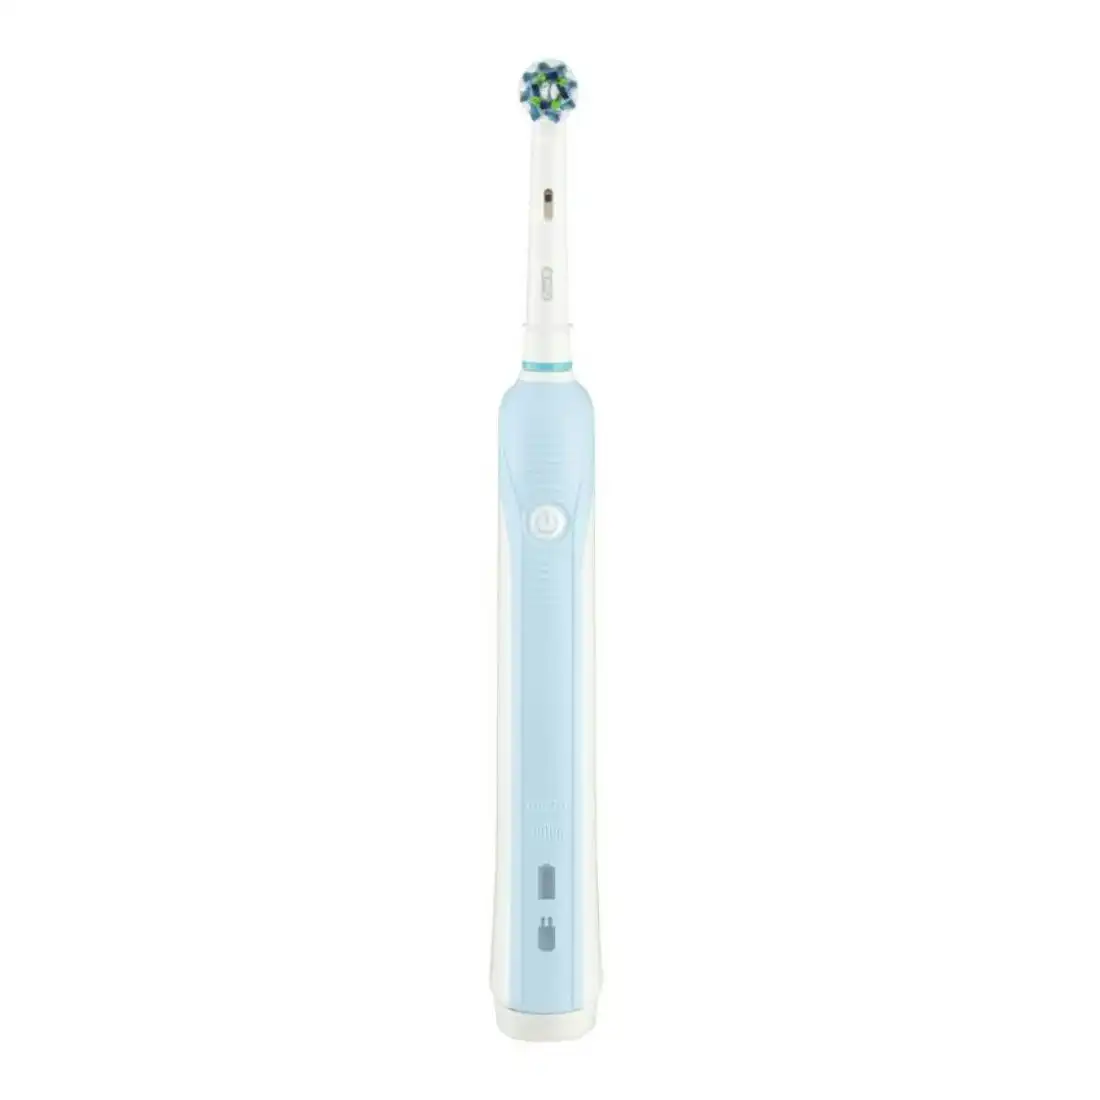 Oral-B Pro 500 Electric Toothbrush W/ Travel Case - Blue